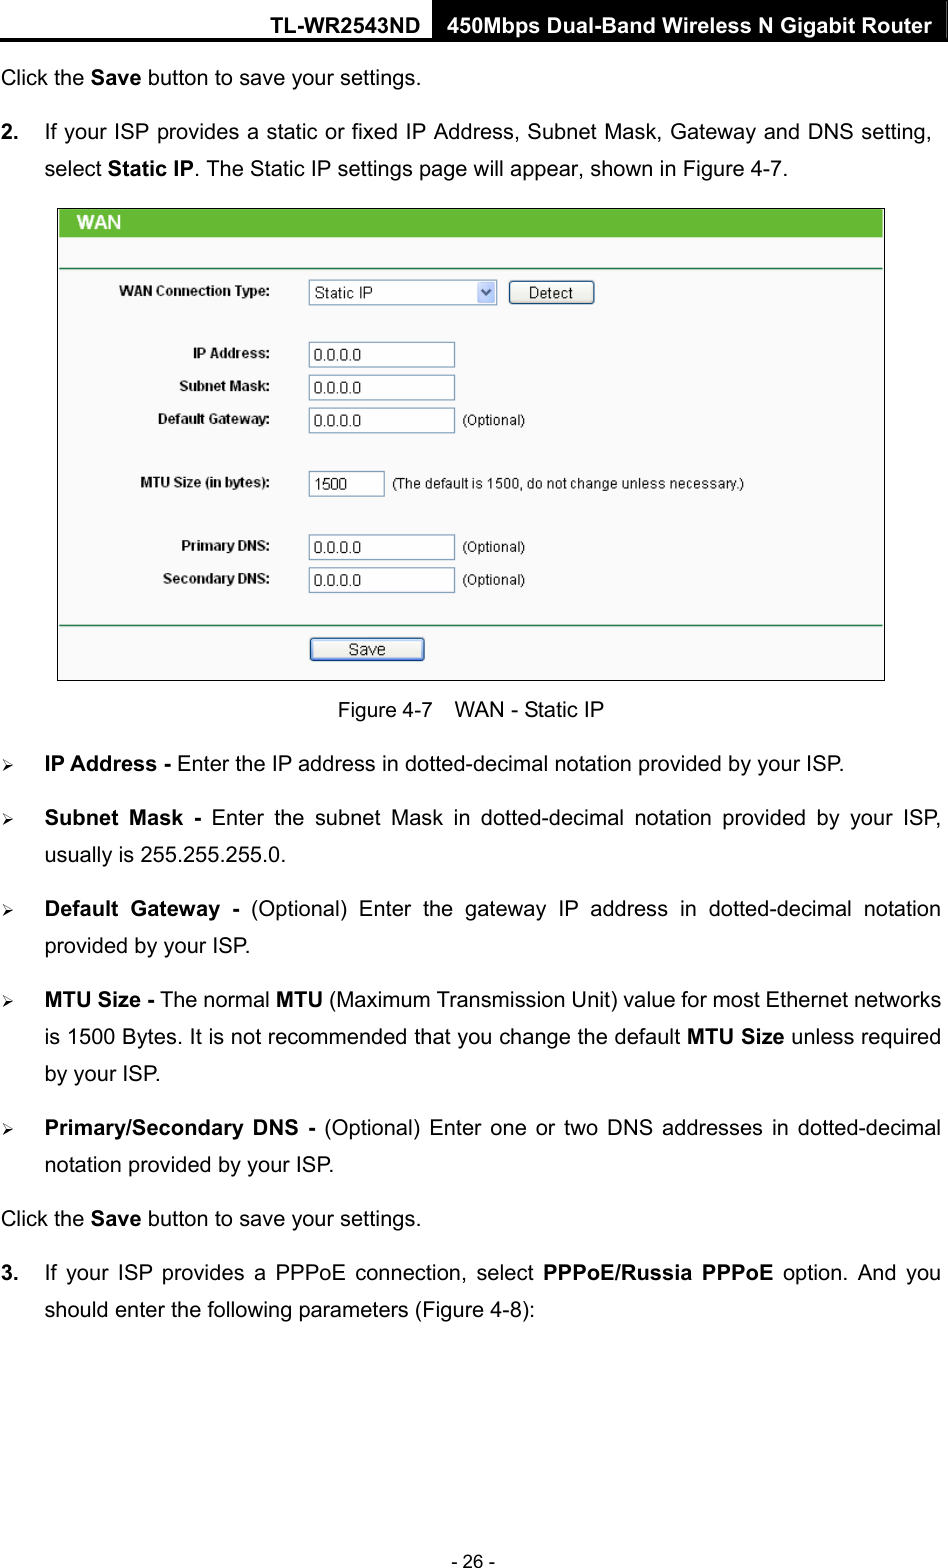 TL-WR2543ND 450Mbps Dual-Band Wireless N Gigabit Router - 26 - Click the Save button to save your settings. 2.  If your ISP provides a static or fixed IP Address, Subnet Mask, Gateway and DNS setting, select Static IP. The Static IP settings page will appear, shown in Figure 4-7.  Figure 4-7    WAN - Static IP ¾ IP Address - Enter the IP address in dotted-decimal notation provided by your ISP. ¾ Subnet Mask - Enter the subnet Mask in dotted-decimal notation provided by your ISP, usually is 255.255.255.0. ¾ Default Gateway - (Optional) Enter the gateway IP address in dotted-decimal notation provided by your ISP. ¾ MTU Size - The normal MTU (Maximum Transmission Unit) value for most Ethernet networks is 1500 Bytes. It is not recommended that you change the default MTU Size unless required by your ISP.   ¾ Primary/Secondary DNS - (Optional) Enter one or two DNS addresses in dotted-decimal notation provided by your ISP. Click the Save button to save your settings. 3.  If your ISP provides a PPPoE connection, select PPPoE/Russia PPPoE option. And you should enter the following parameters (Figure 4-8): 